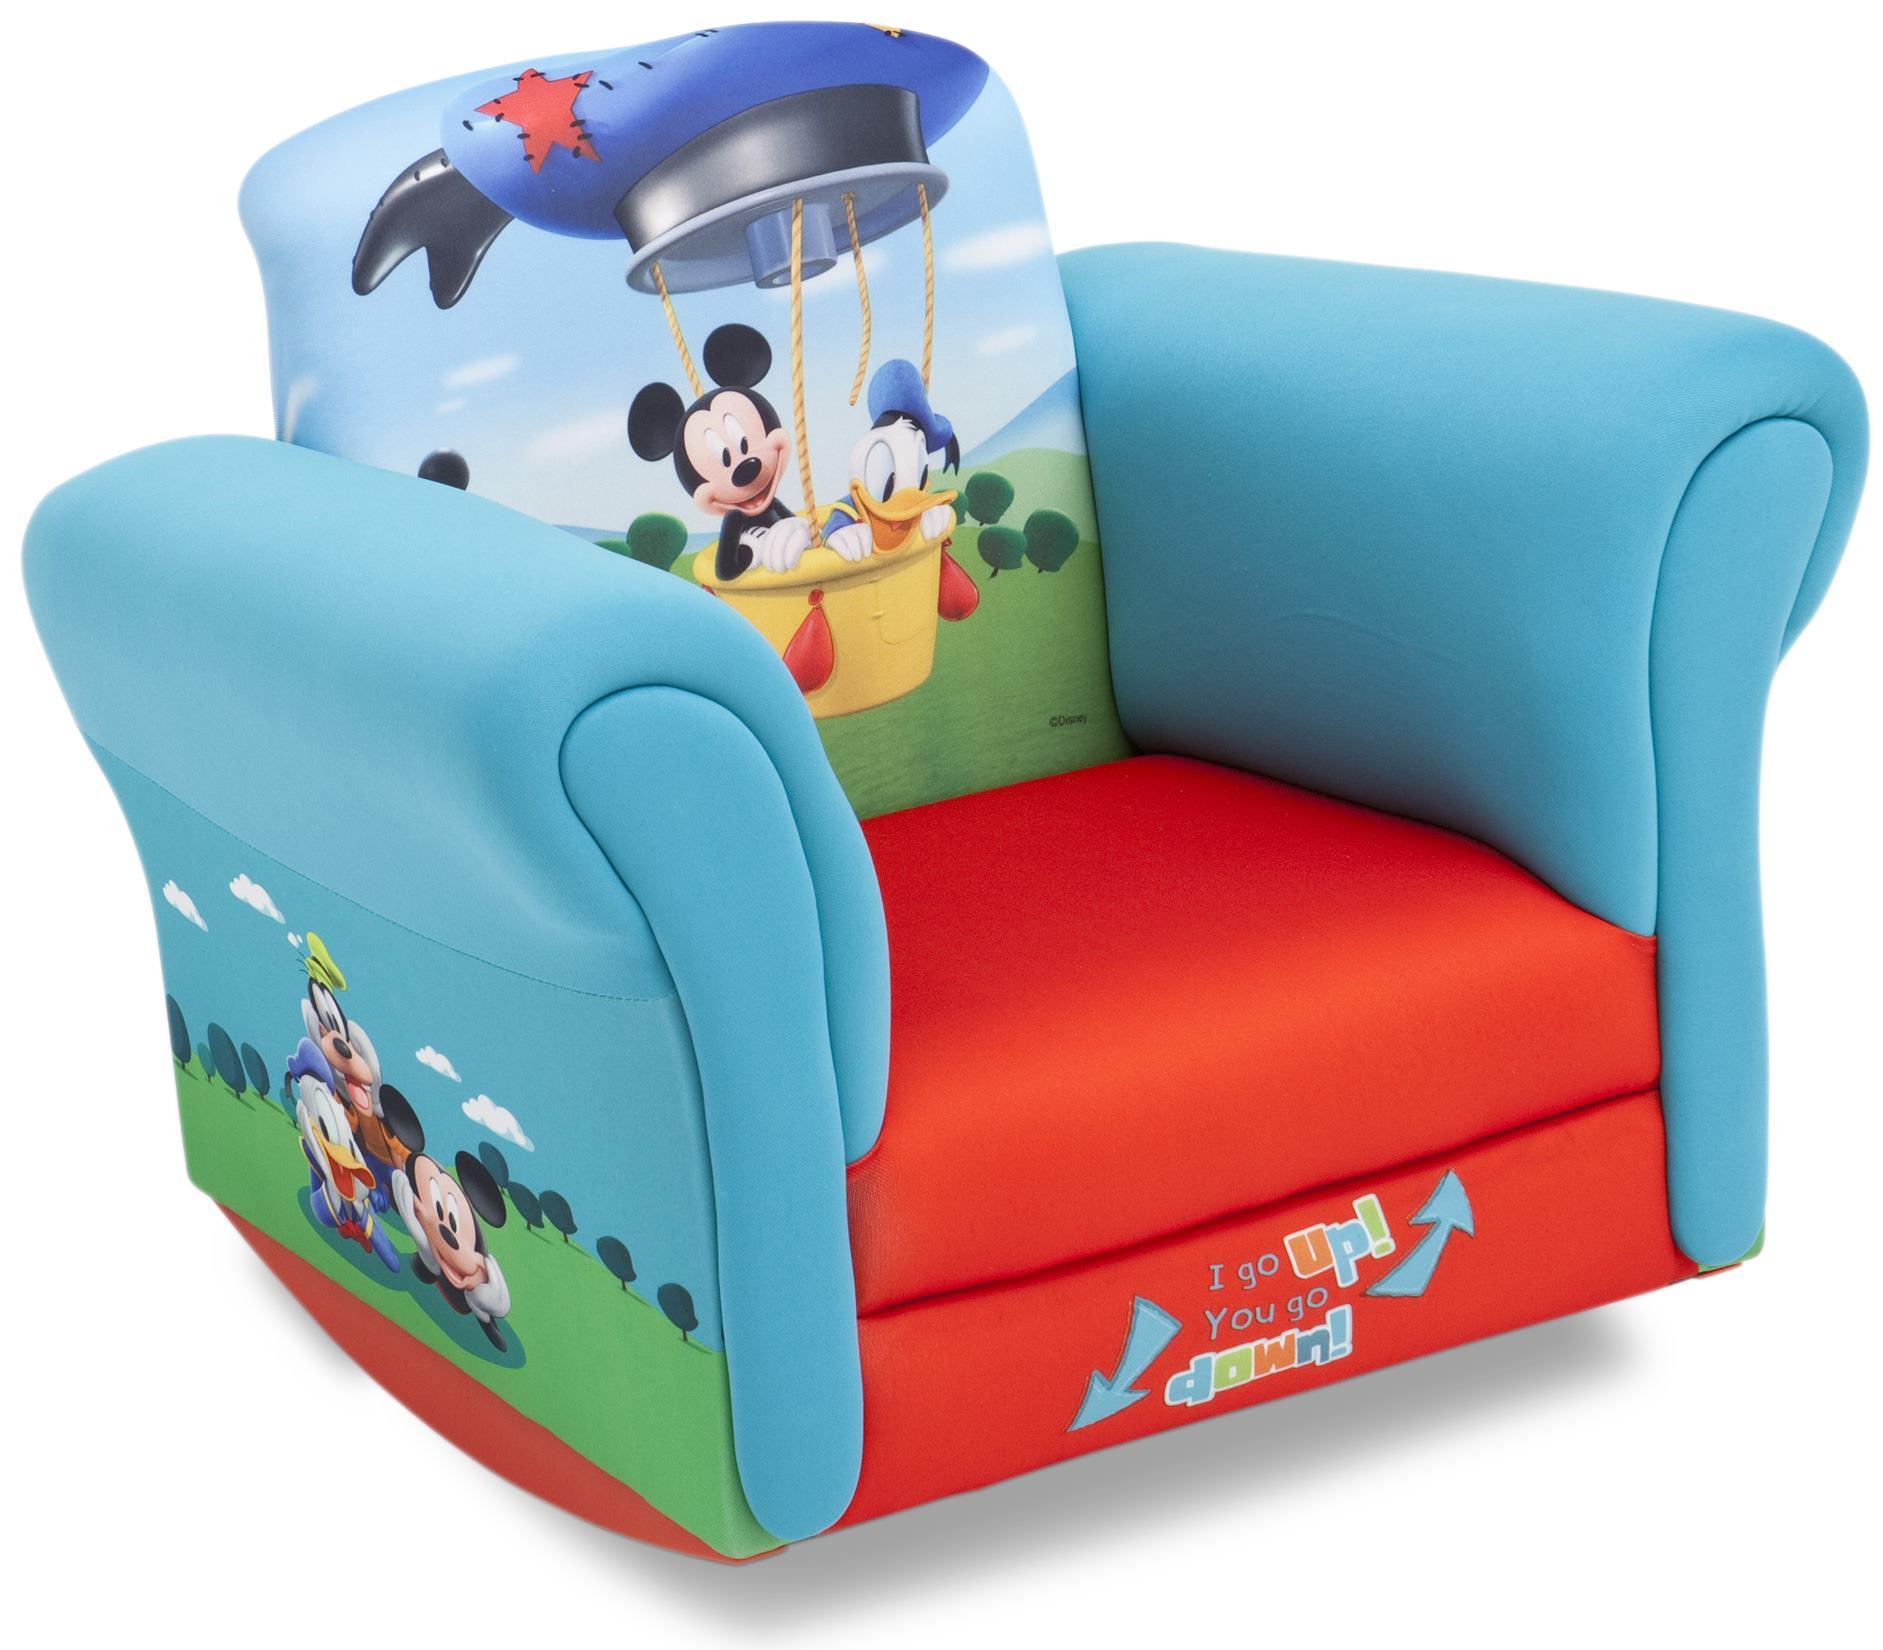 Disney Baby Upholstered Child's Mickey Mouse Rocking Chair